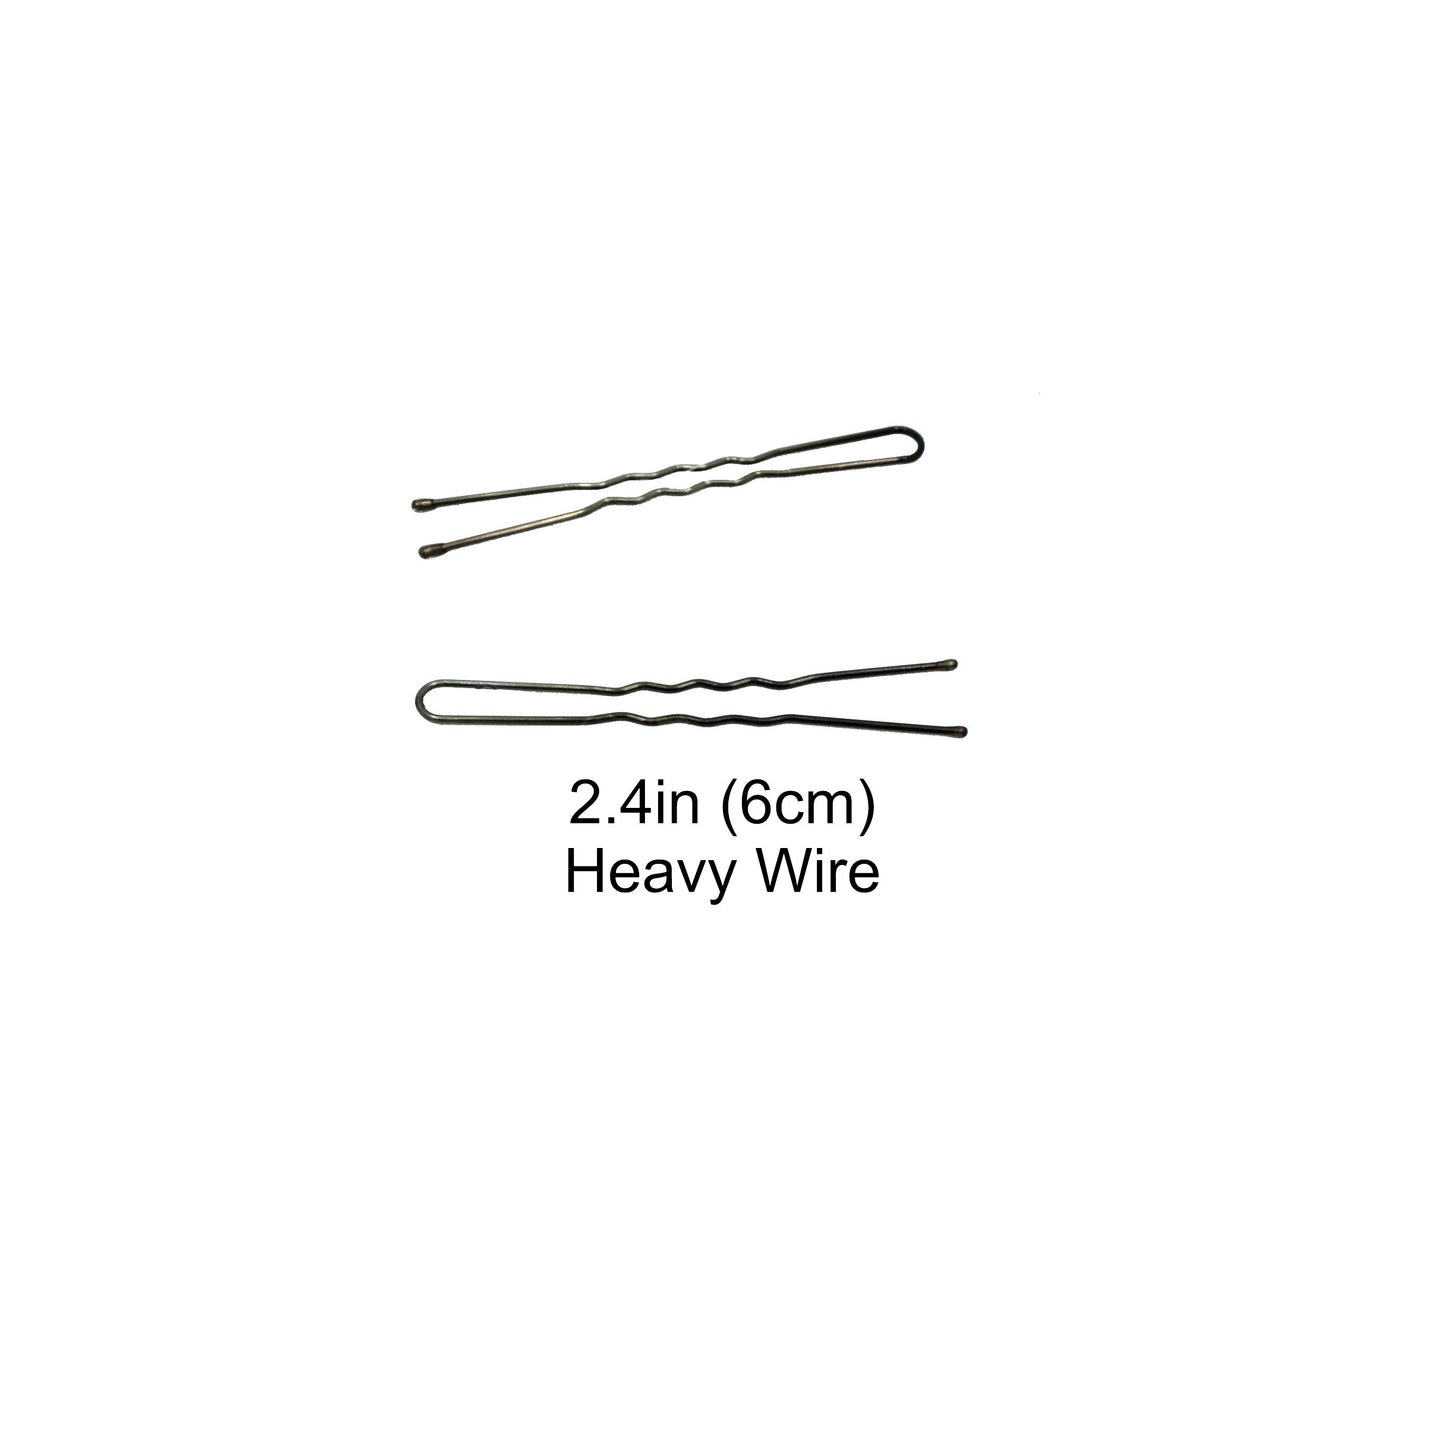 400, Brown, 2.4in (6.0cm), Italian Made Heavy Waved Hair Pins, Recloseable Stay Clean and Organized Container